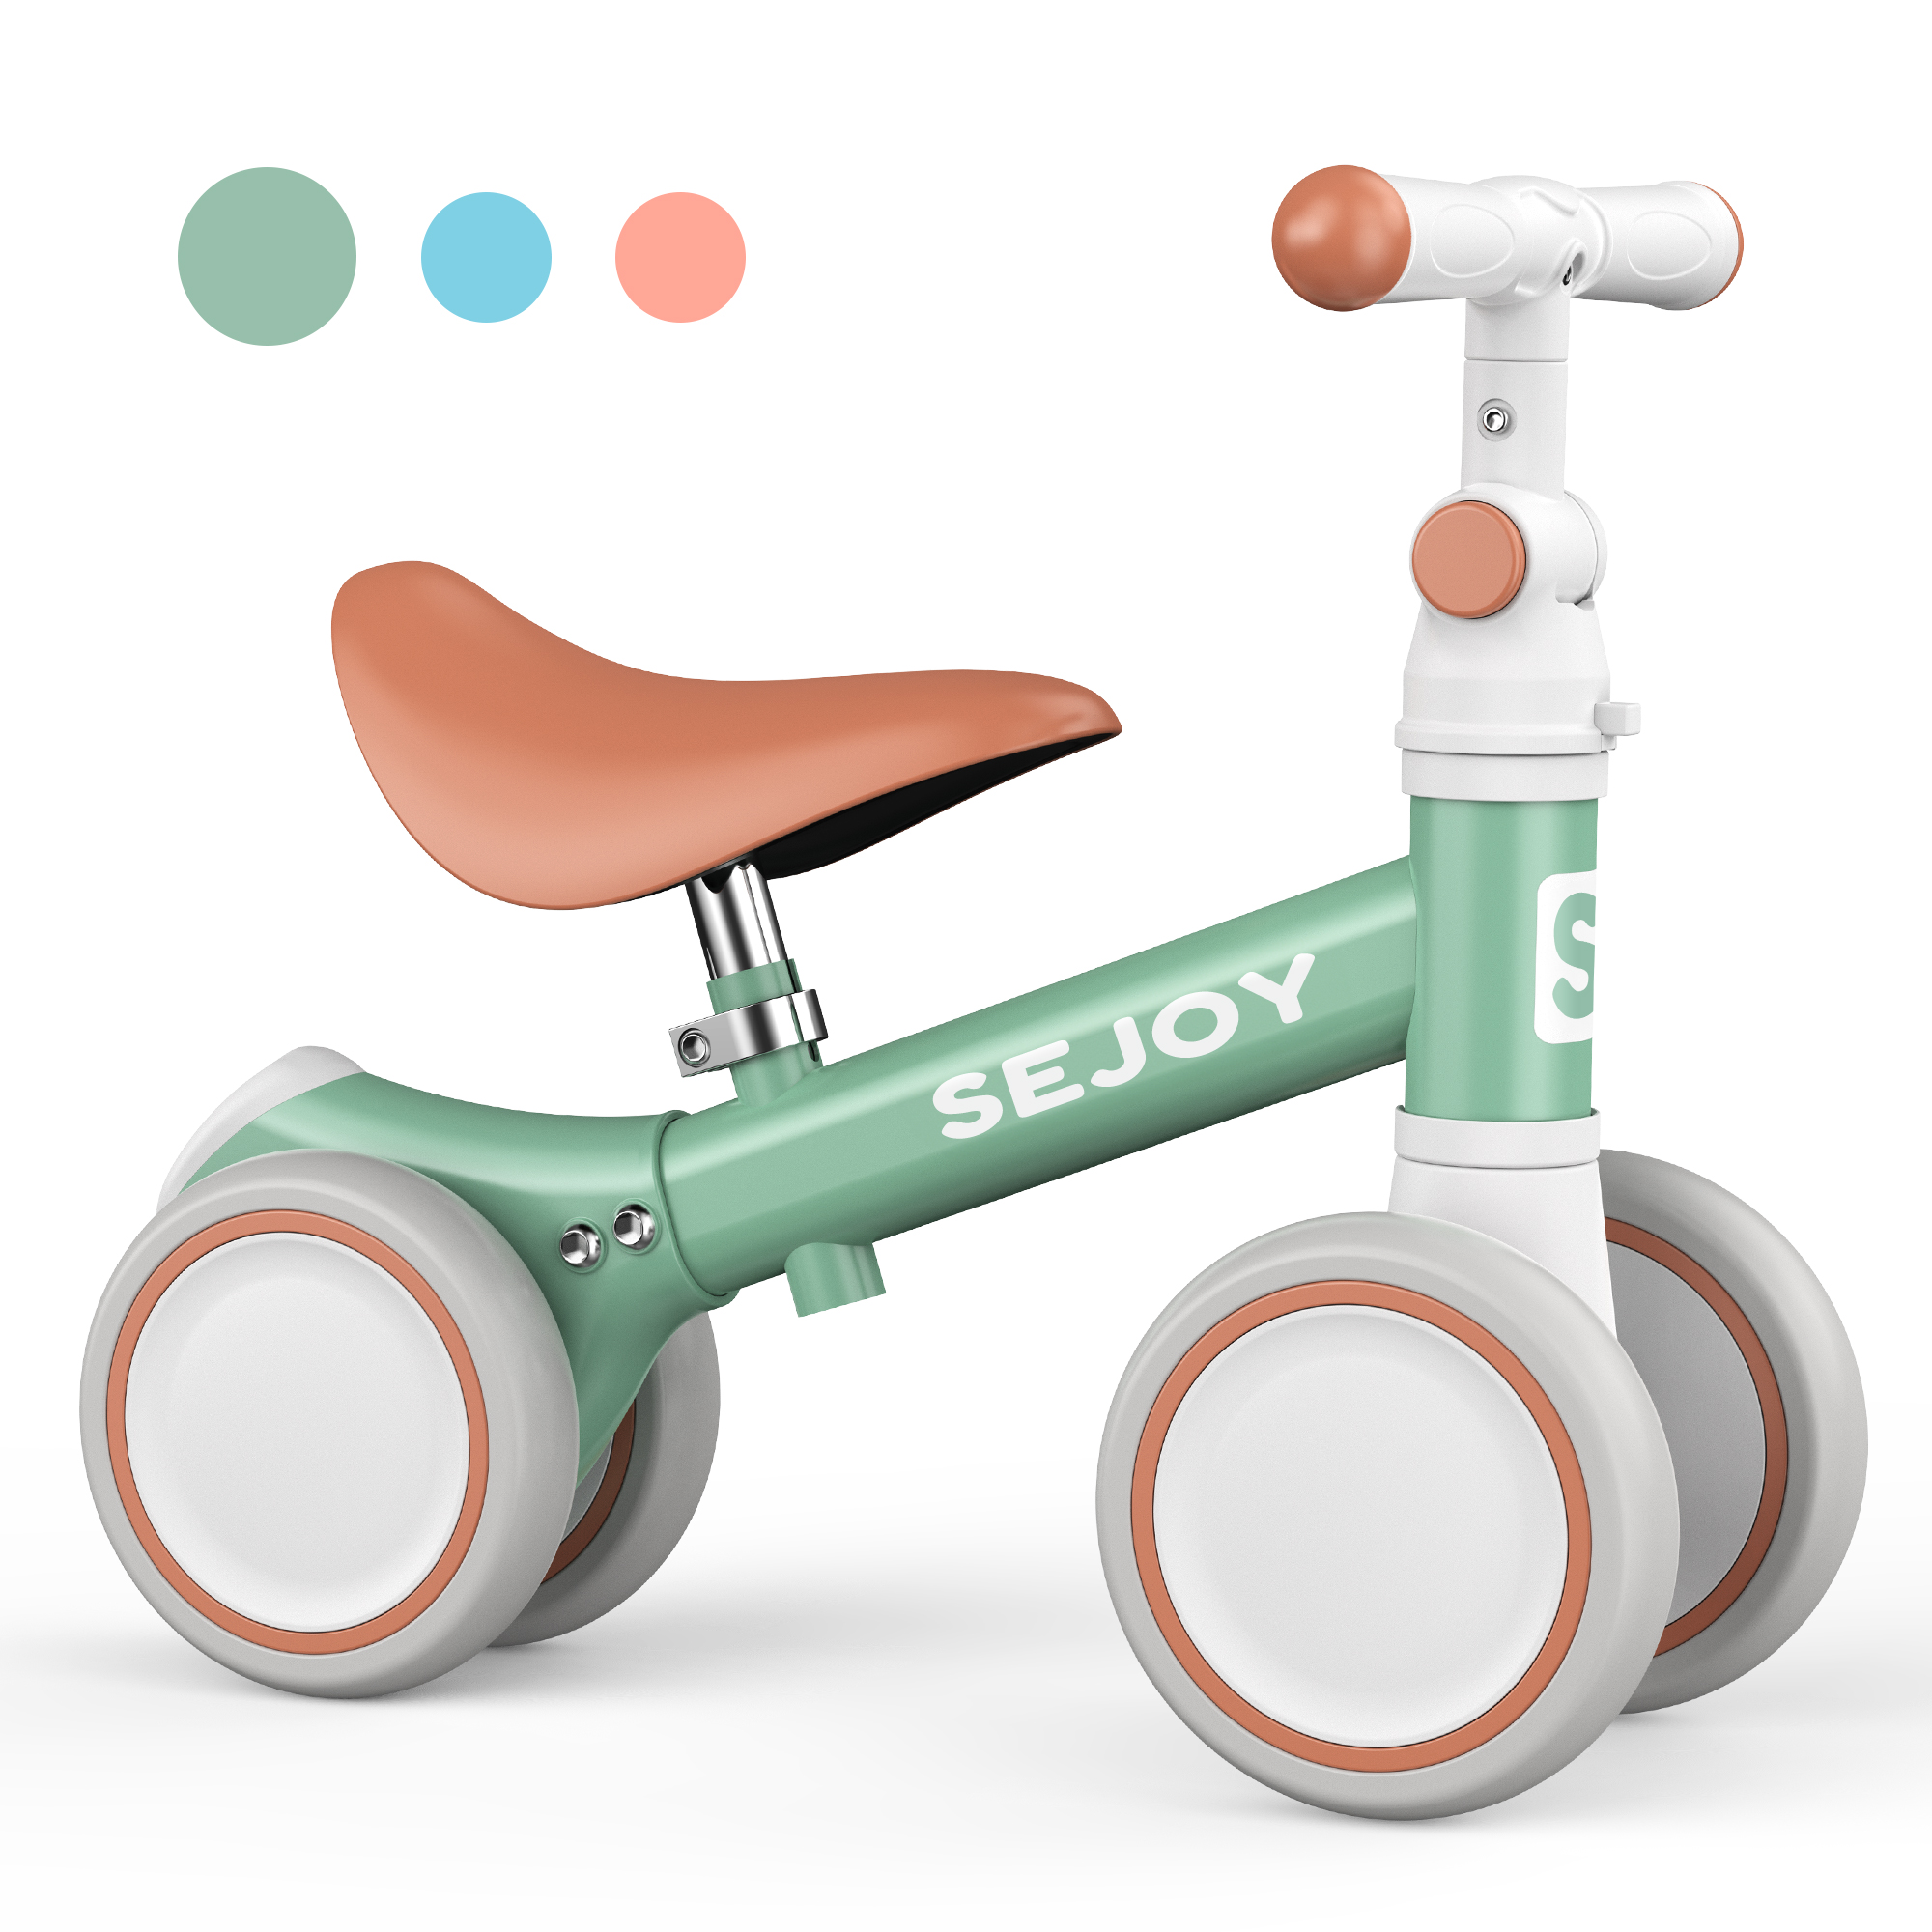 Sejoy Baby Balance Bike, Toddler Baby Bicycle with 4 Wheels for 10-36 Months, Adjustable Handlebar Baby Outdoor Bike Riding Toy, First B-day Gift - image 1 of 9